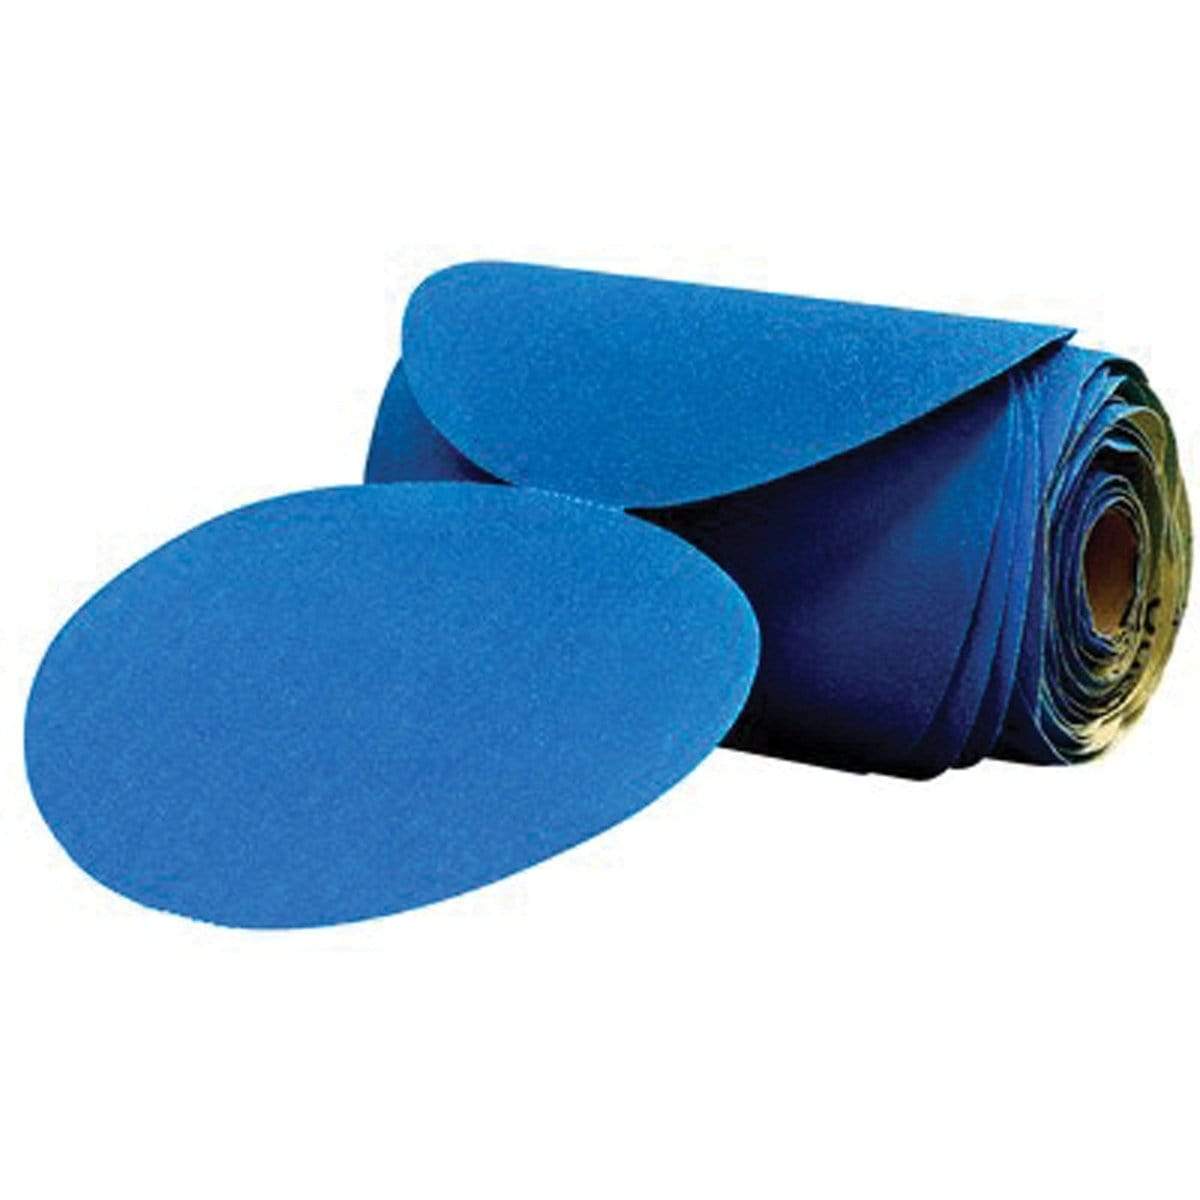 3M Marine Qualifies for Free Shipping 3M Stikit Blue Sandpaper 6" Disc 600 100/Roll #36213